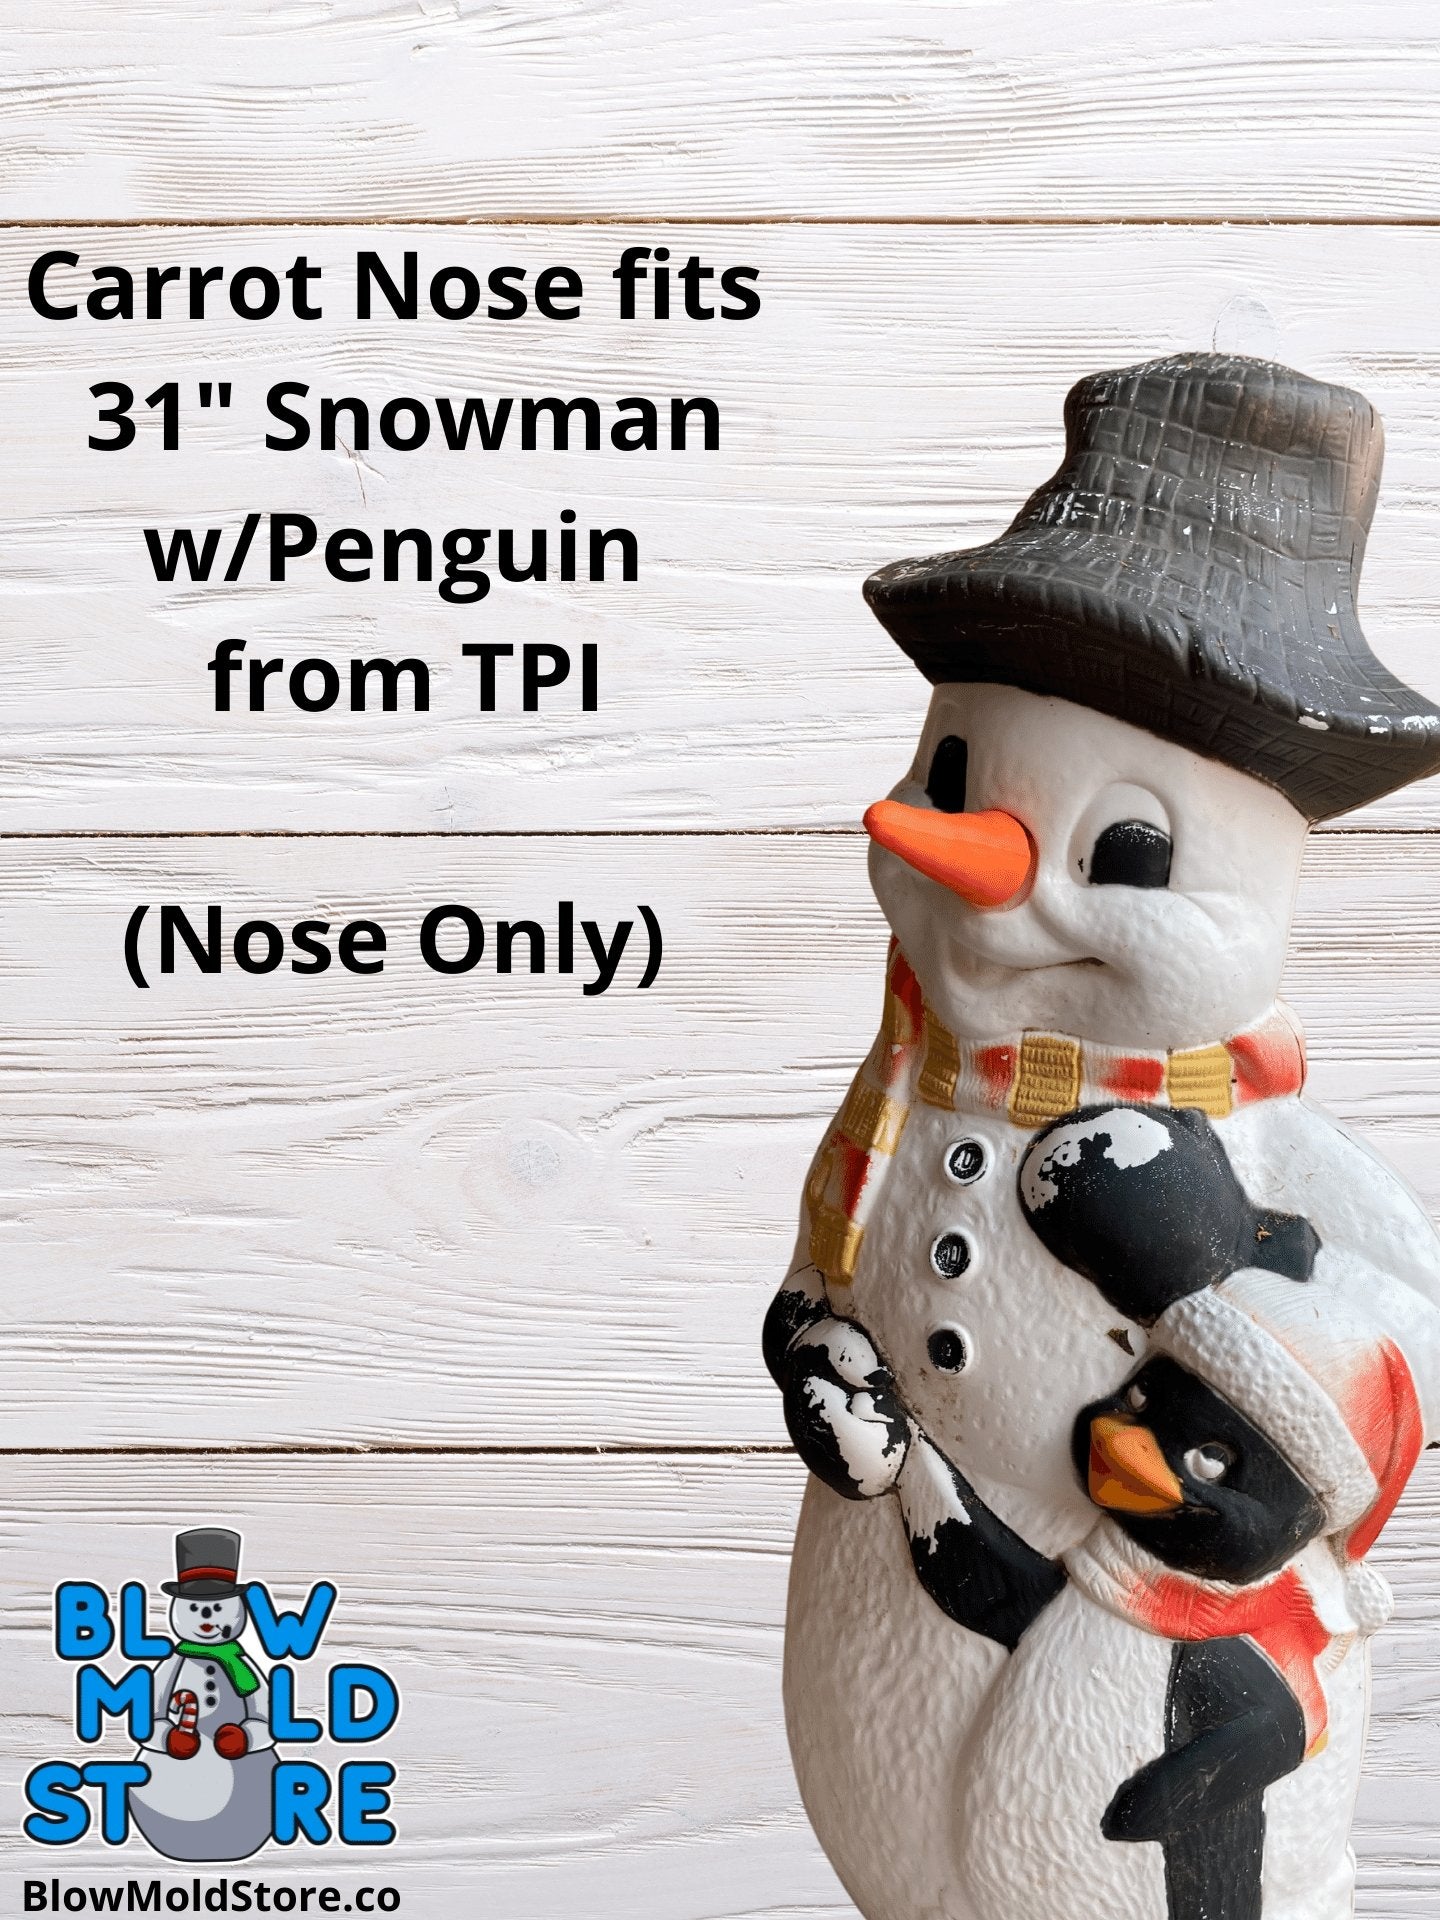 Blow Mold Carrot Nose Replacement for 40" Snowman with Sled from TPI - Blow Mold Store